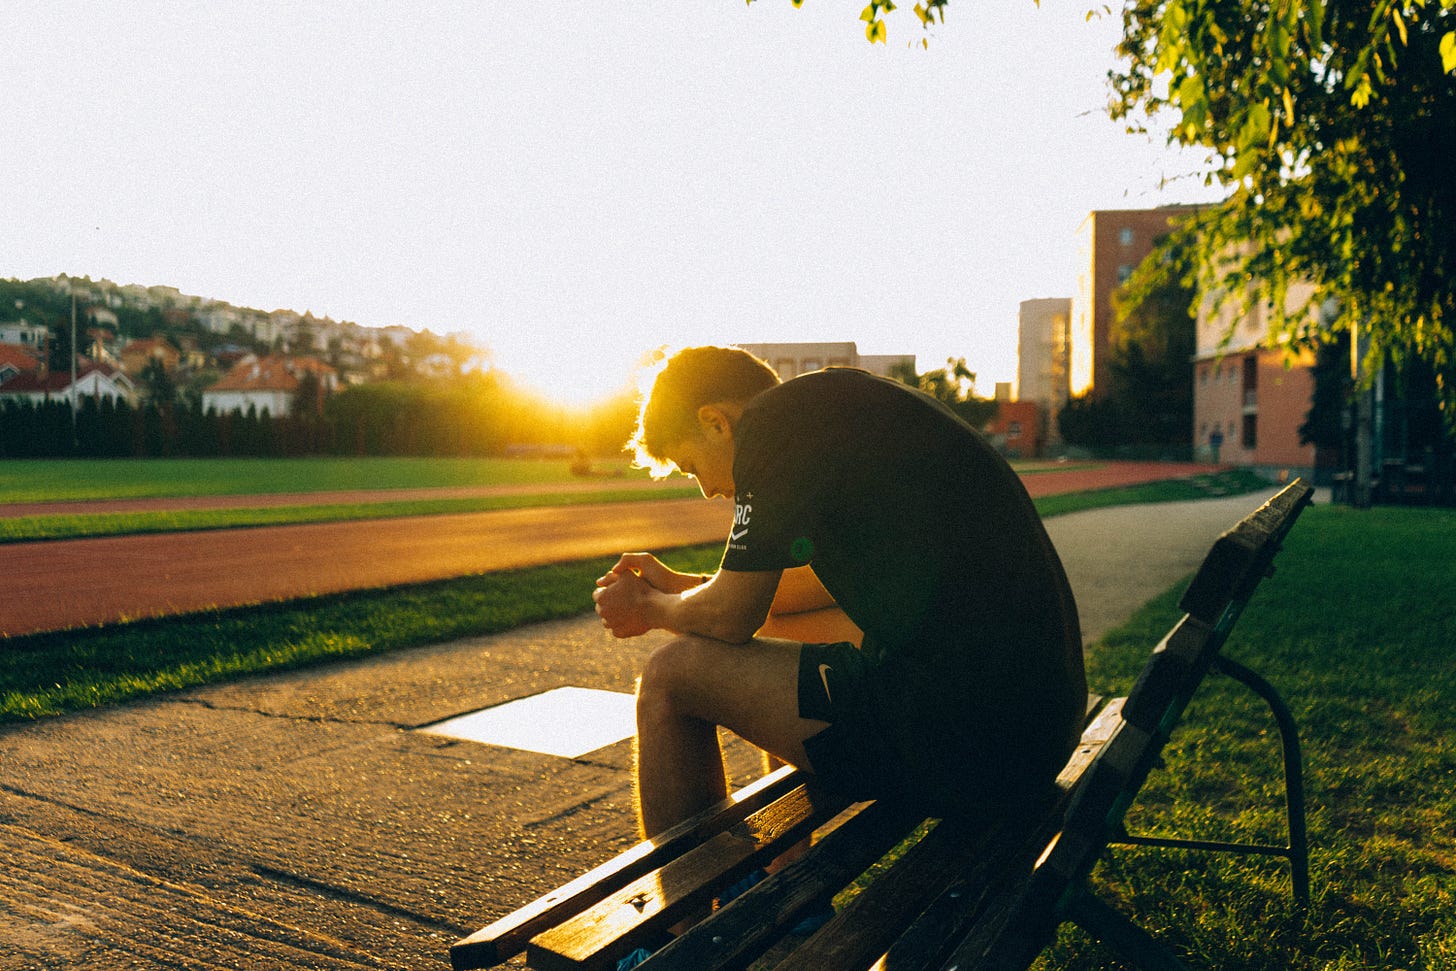 Photo of a person sitting on a bench. They are hunched over, maybe sad or thoughtful. Time of day is sunrise or sunset.